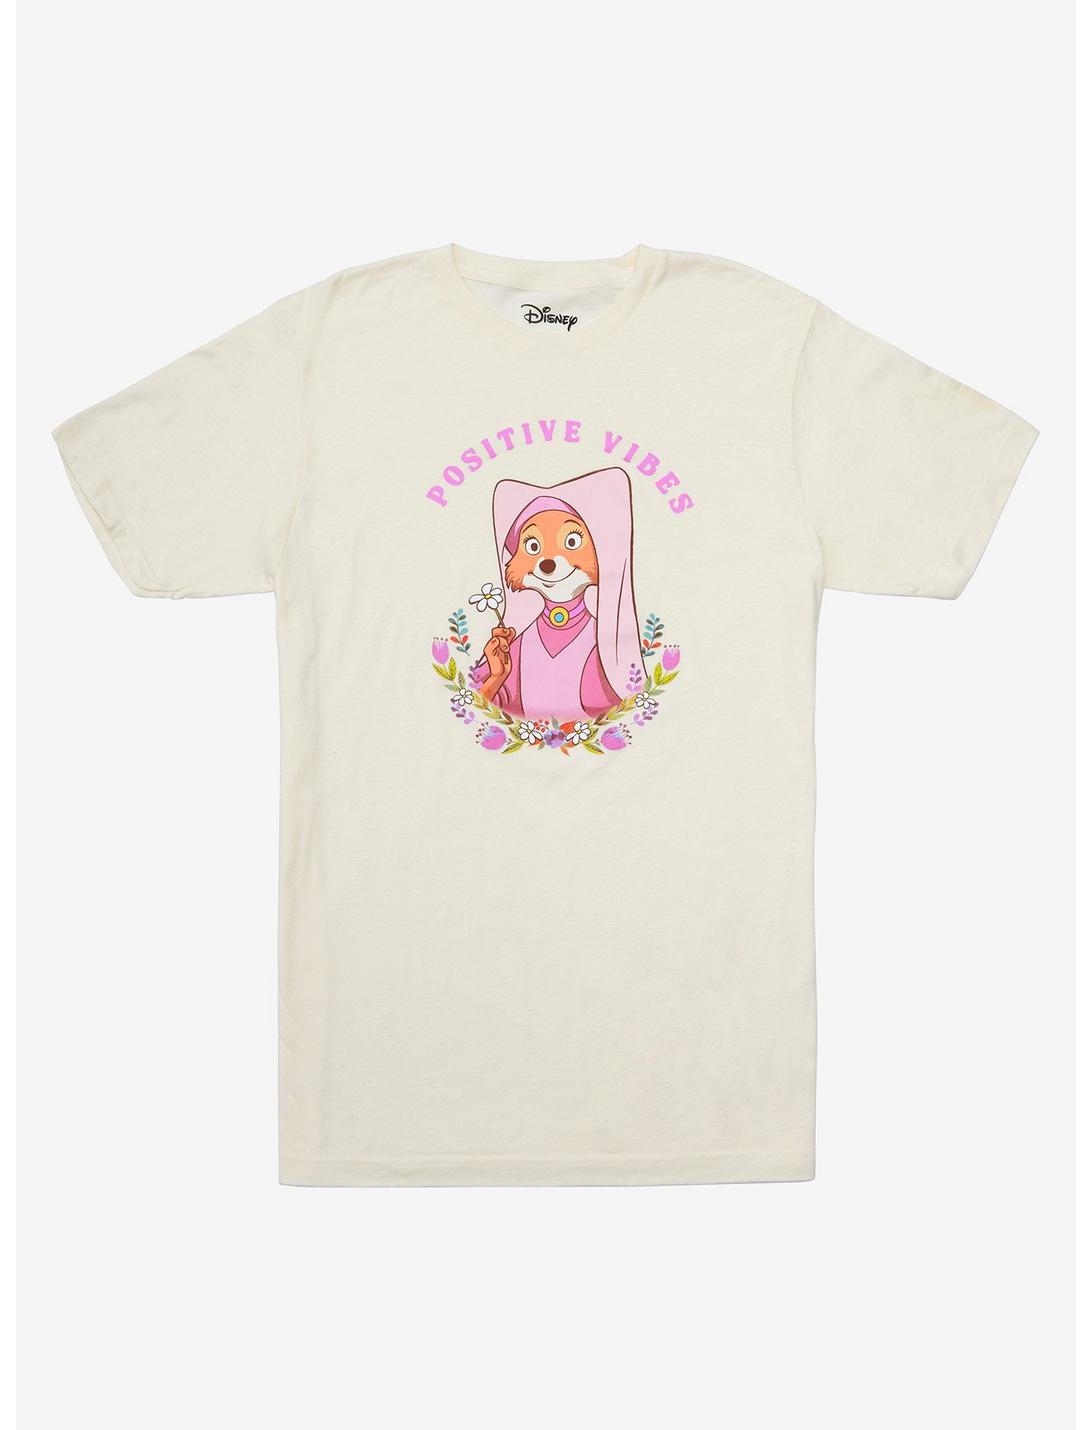 Disney Robin Hood Maid Marian Positive Vibes Women's T-Shirt - BoxLunch Exclusive, PINK, hi-res